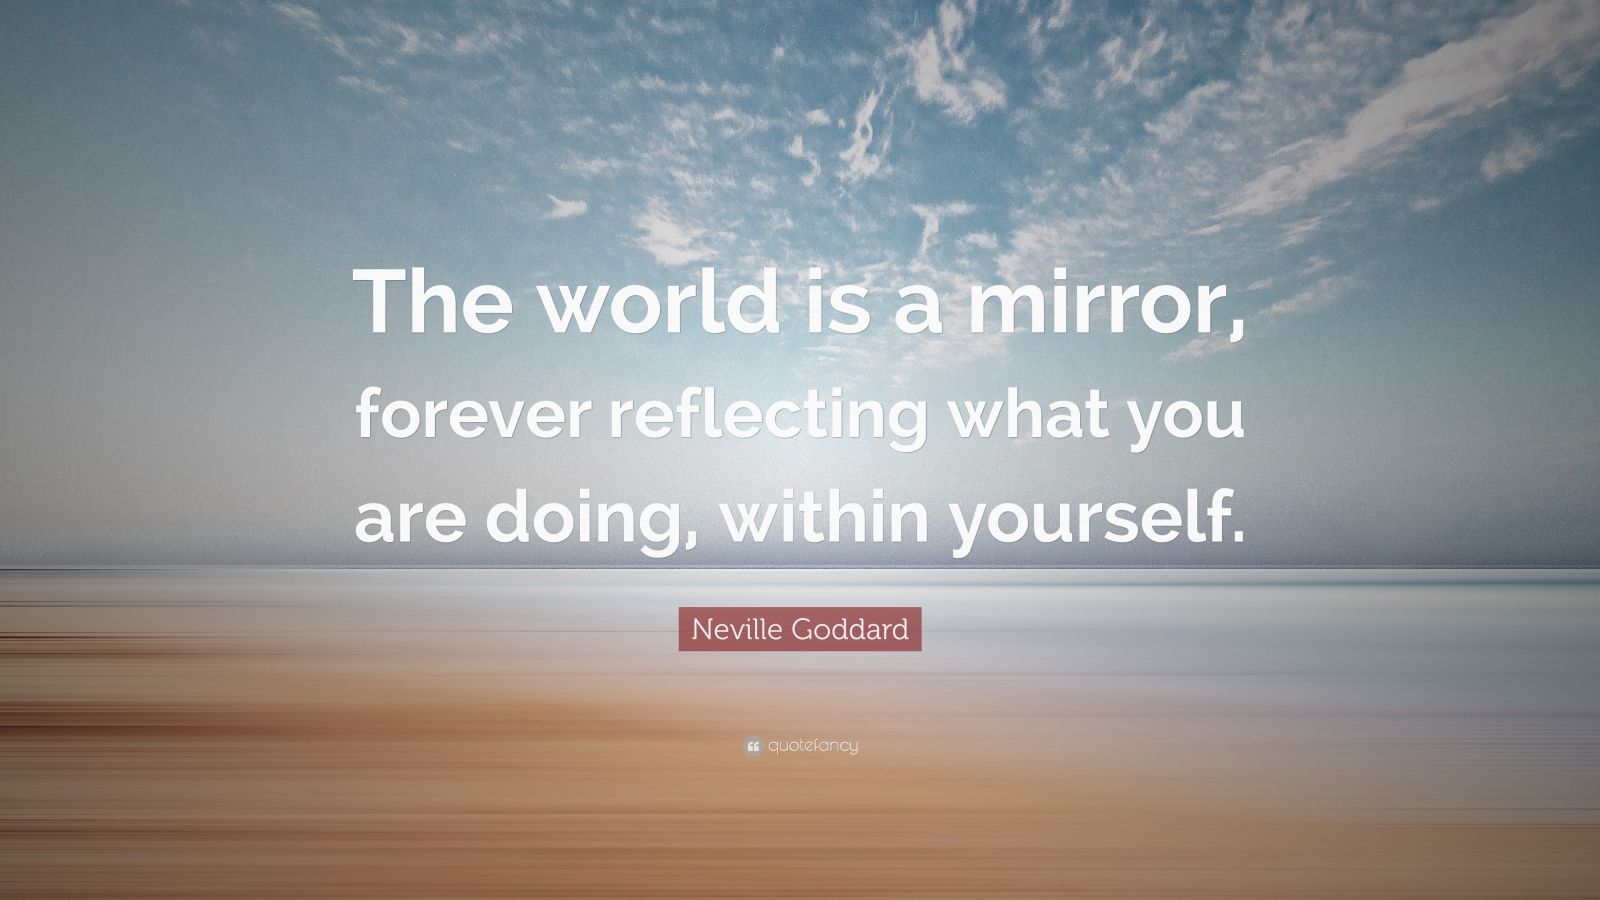 Neville Goddard Quote: “The world is a mirror, forever reflecting what ...